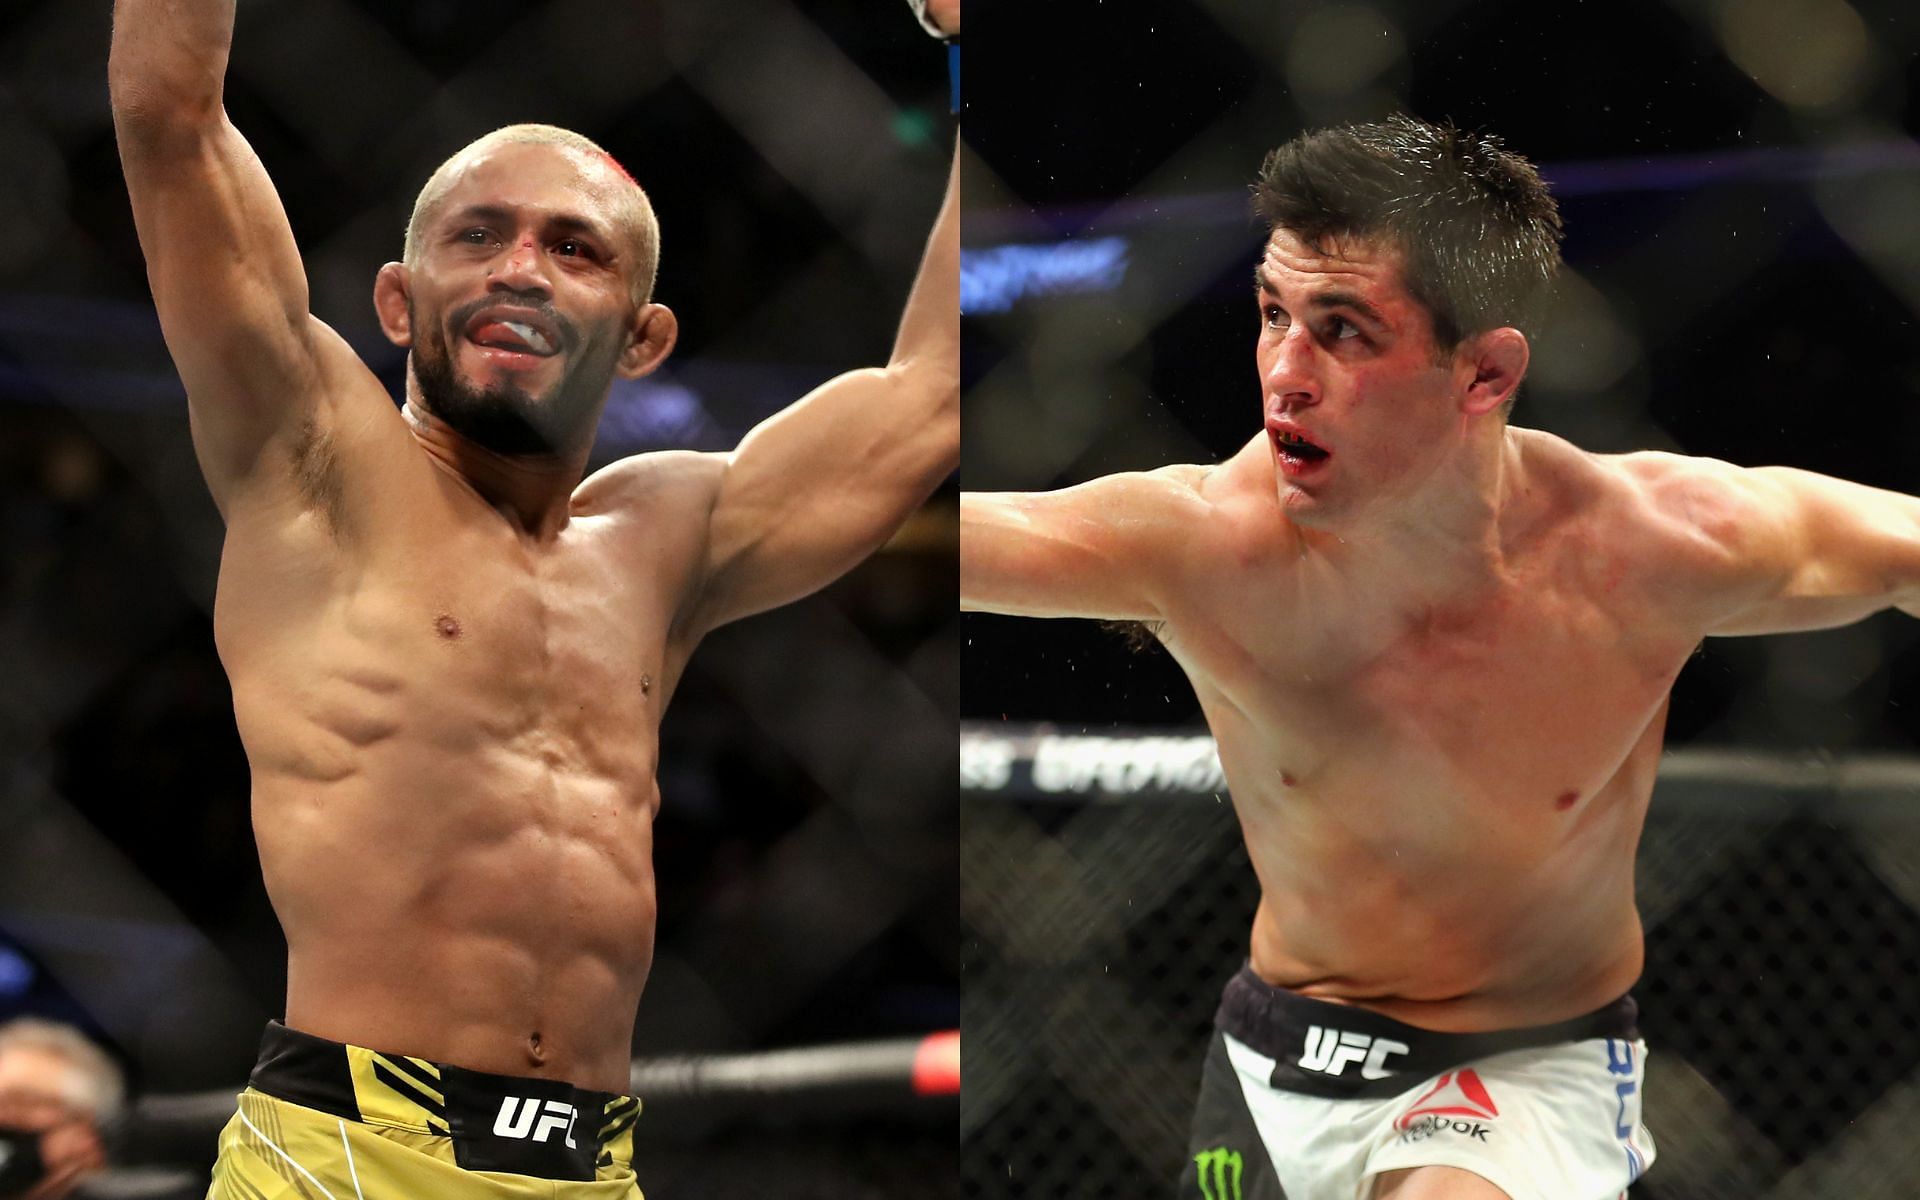 Deiveson Figueiredo (left) has his sights set on fighting MMA great Dominick Cruz (right) [Images courtesy: Getty Images]